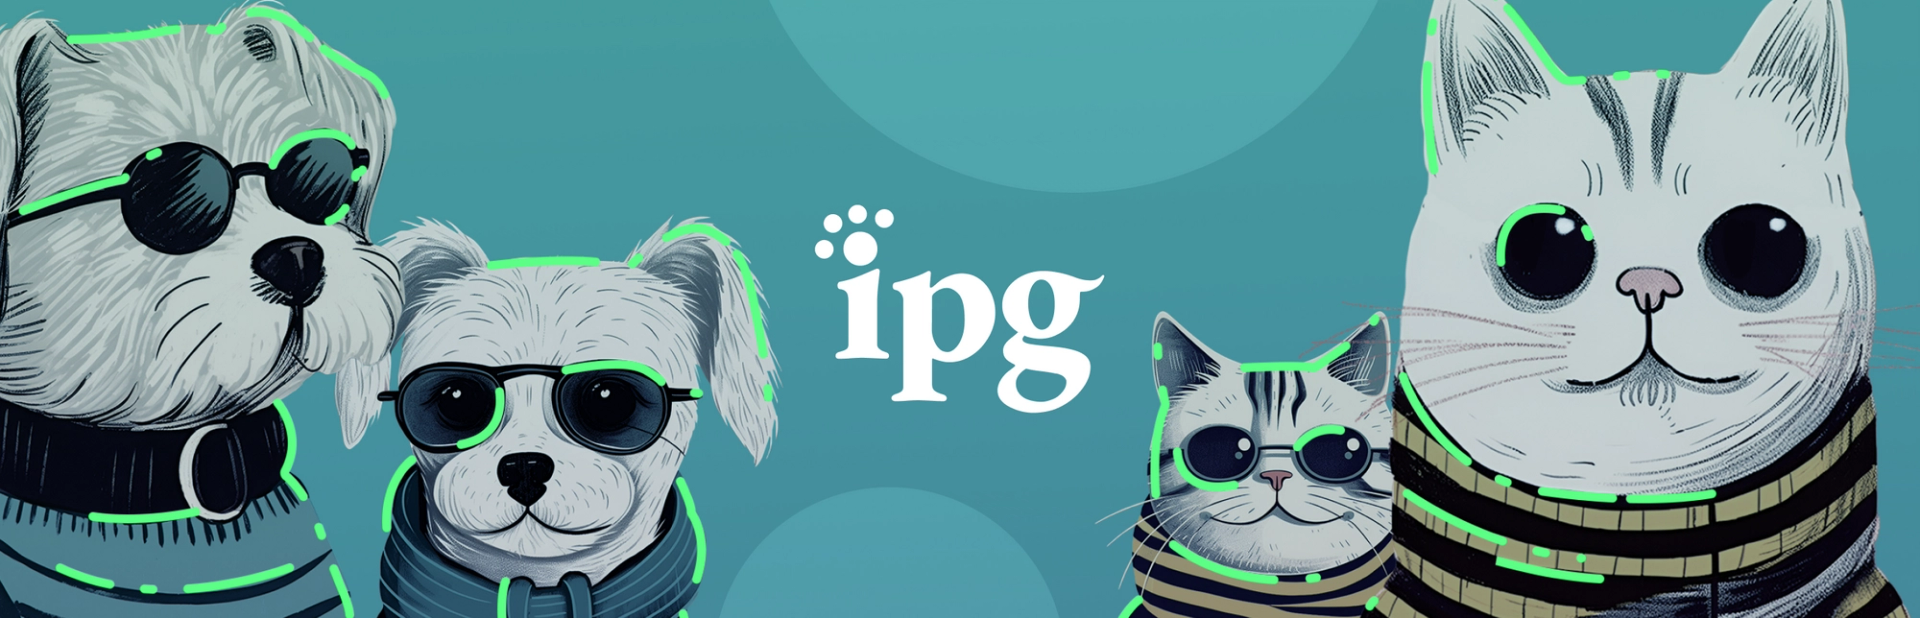 How IPG Created a Bank of AI-Enhanced Illustrations in 12 Hours 